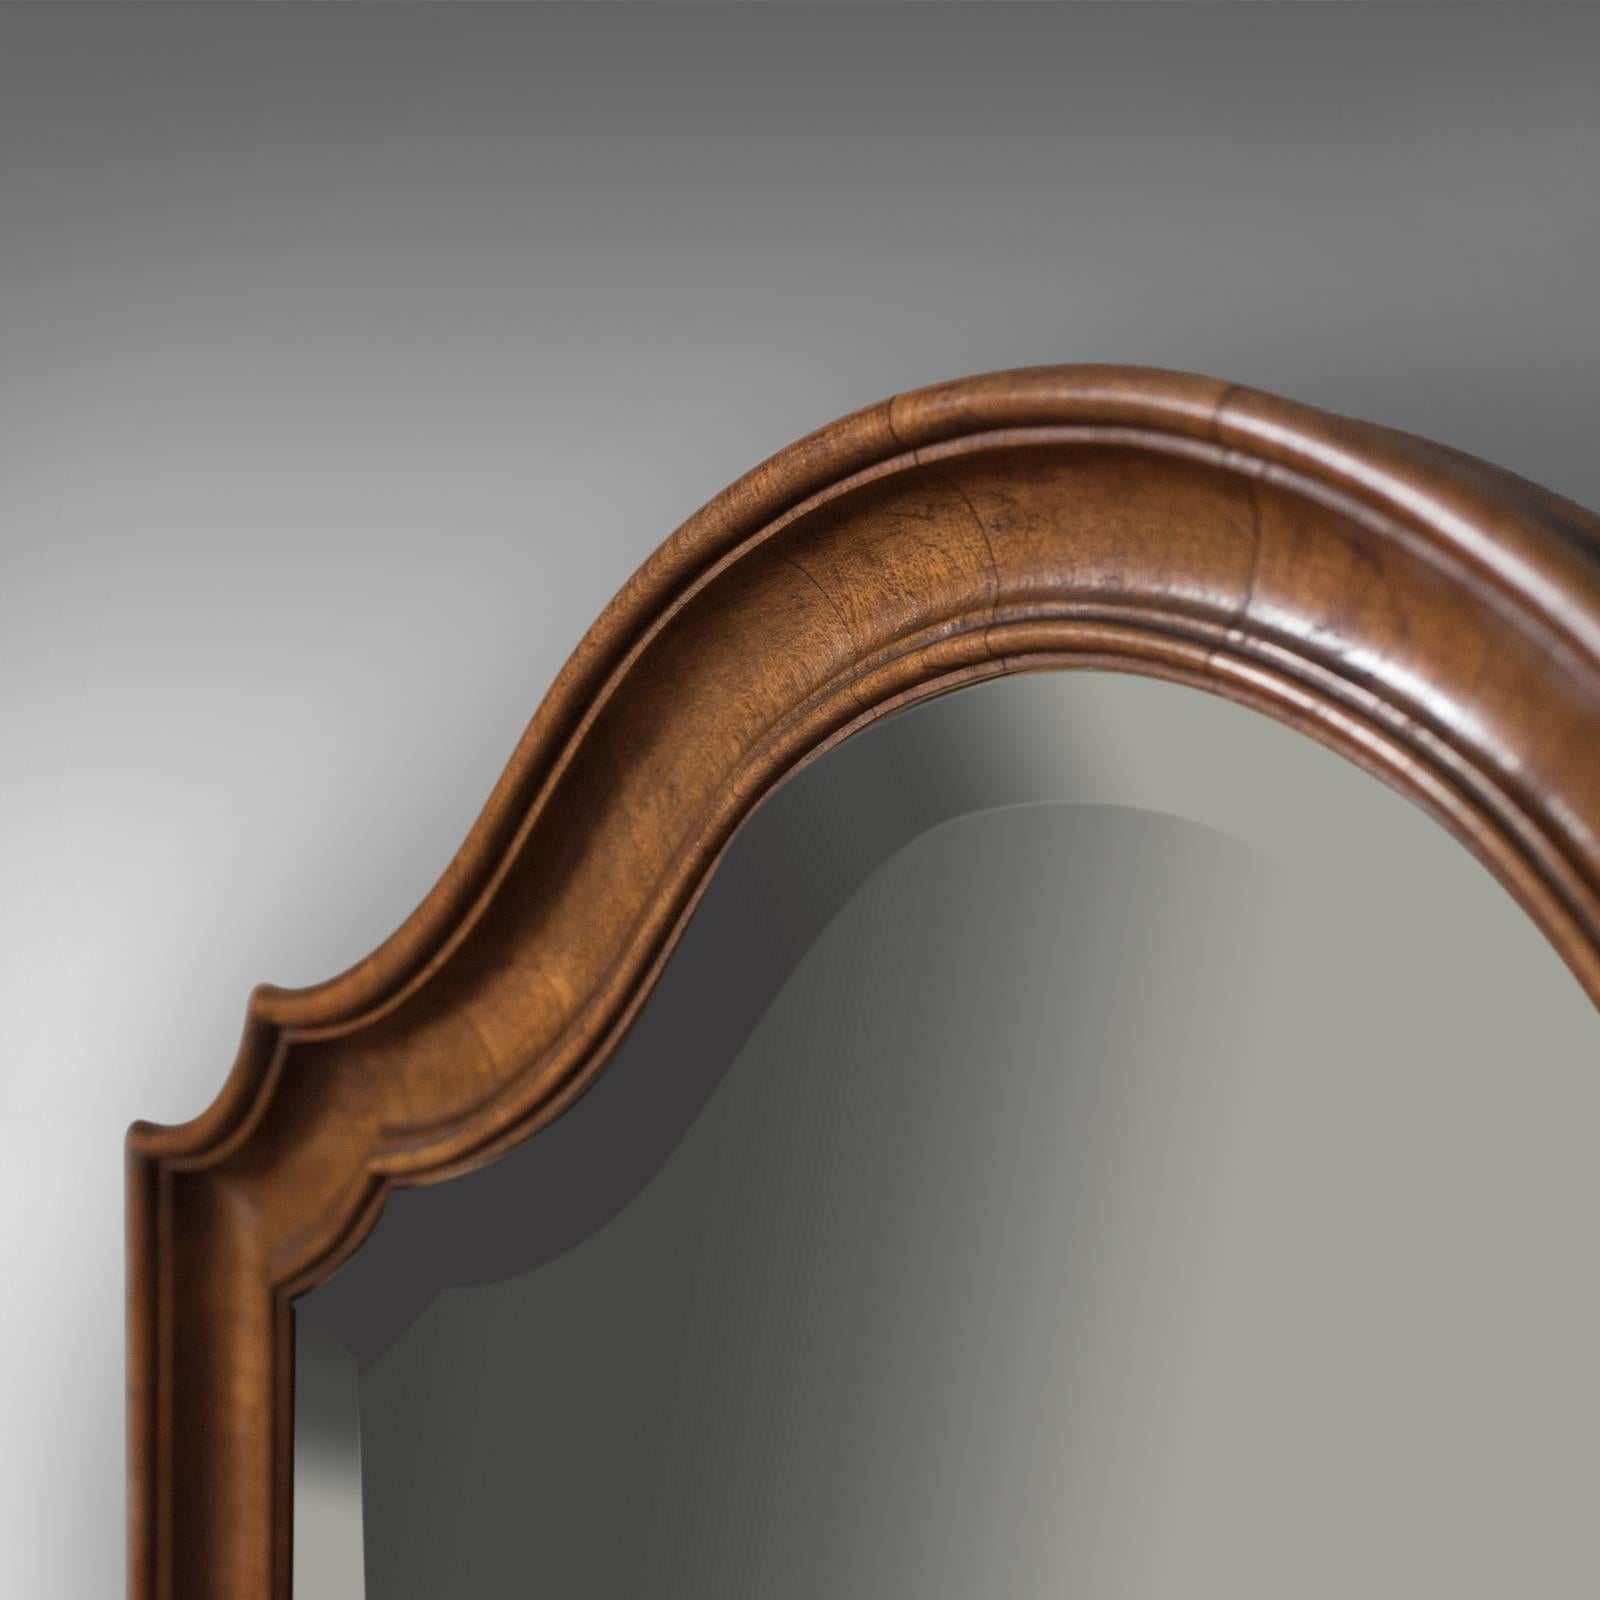 This is an antique wall mirror, English, walnut and dating to the Edwardian period, circa 1910.

From renowned cabinet maker and retailer of fine furnishings G.H. Morton & Sons Ltd.
Out of Bold Street Liverpool, this firm supplied many of the